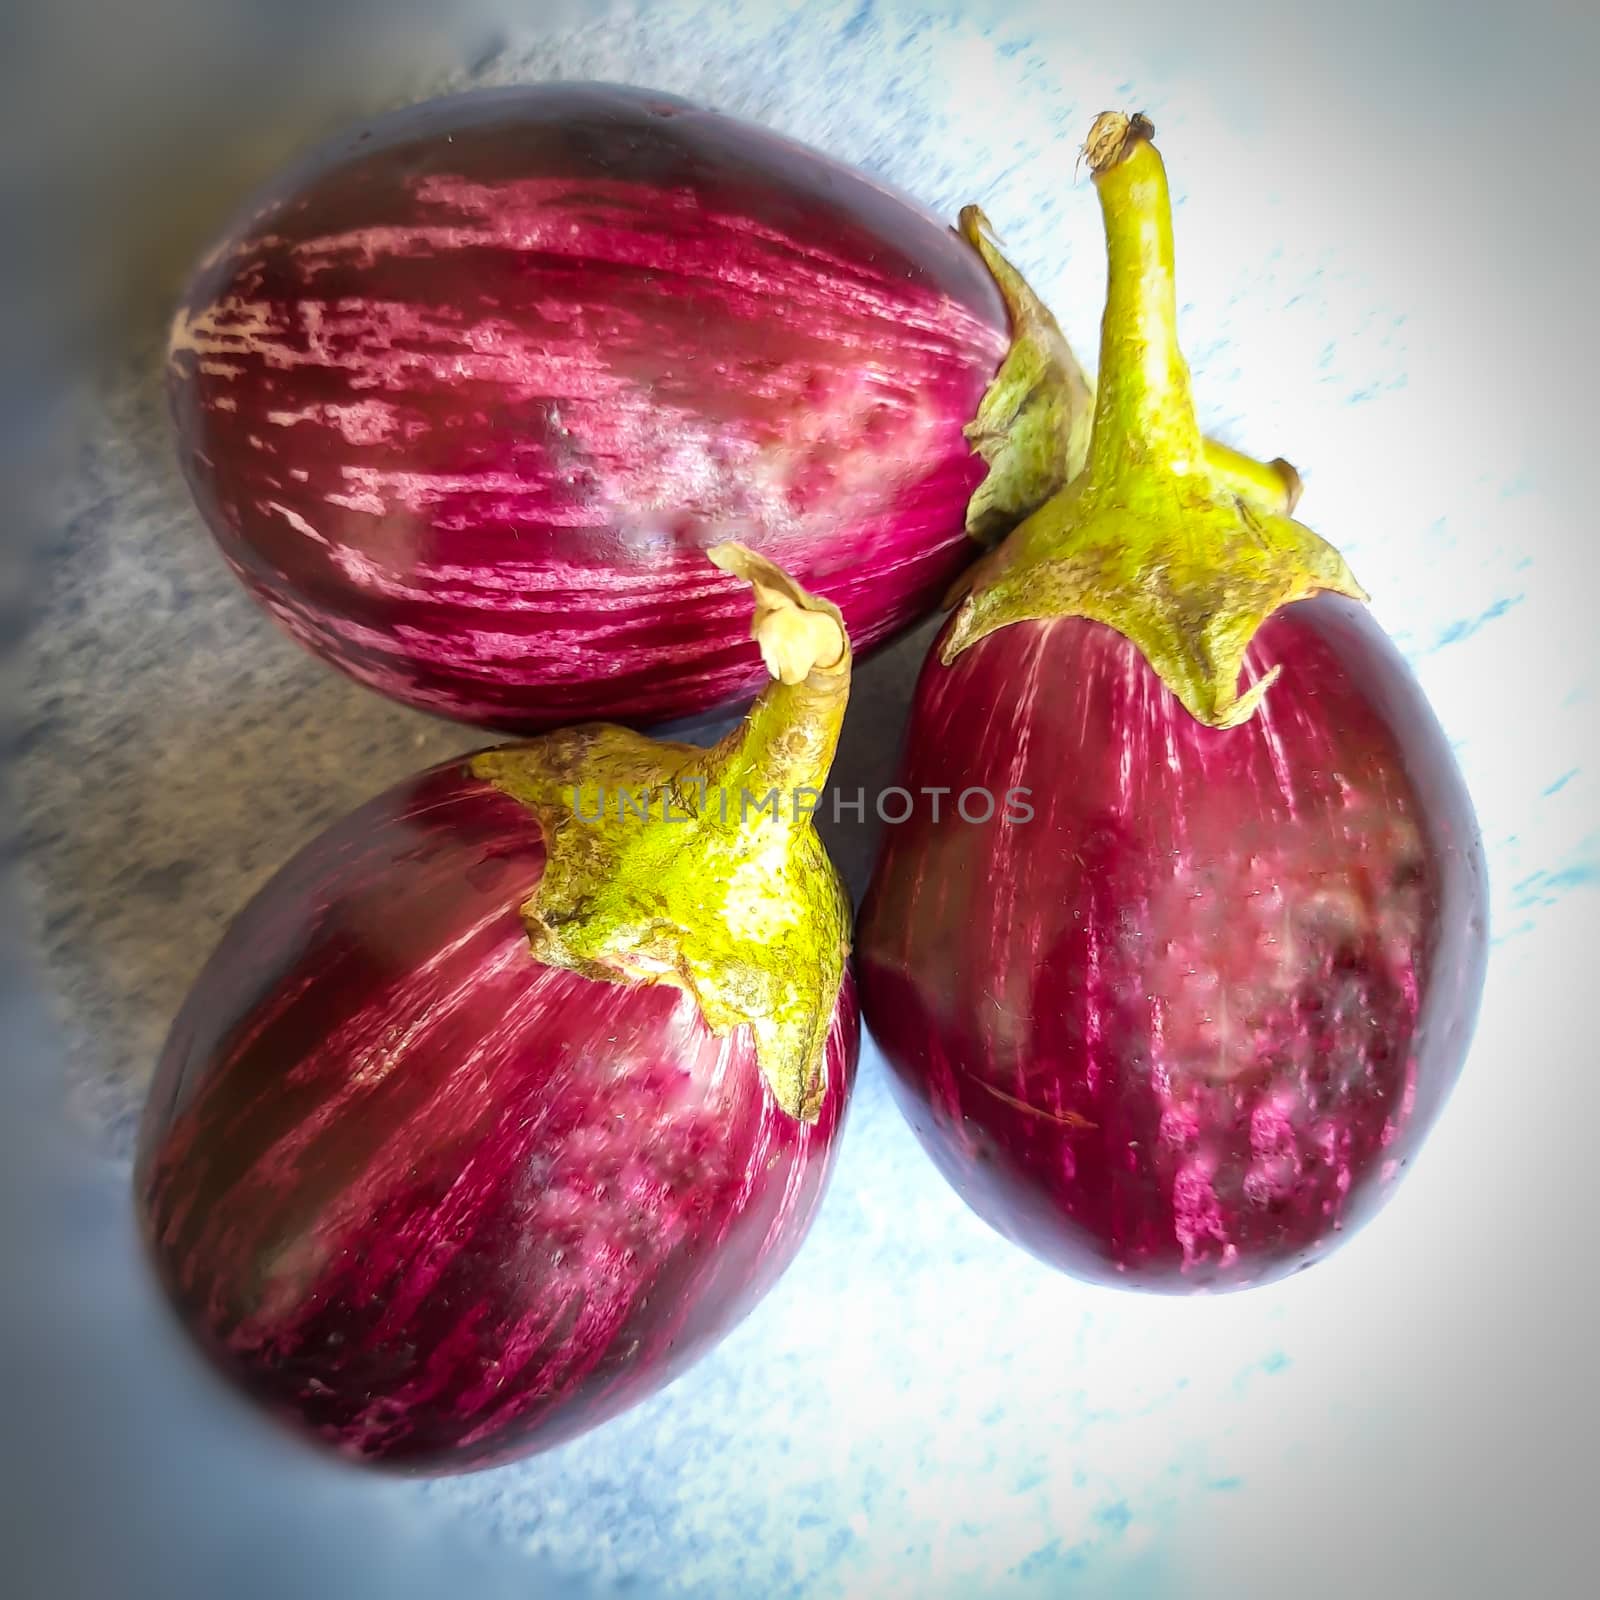 Three violet color big brinjal placed beautifully place in white paper added for indian daily vegetable foods